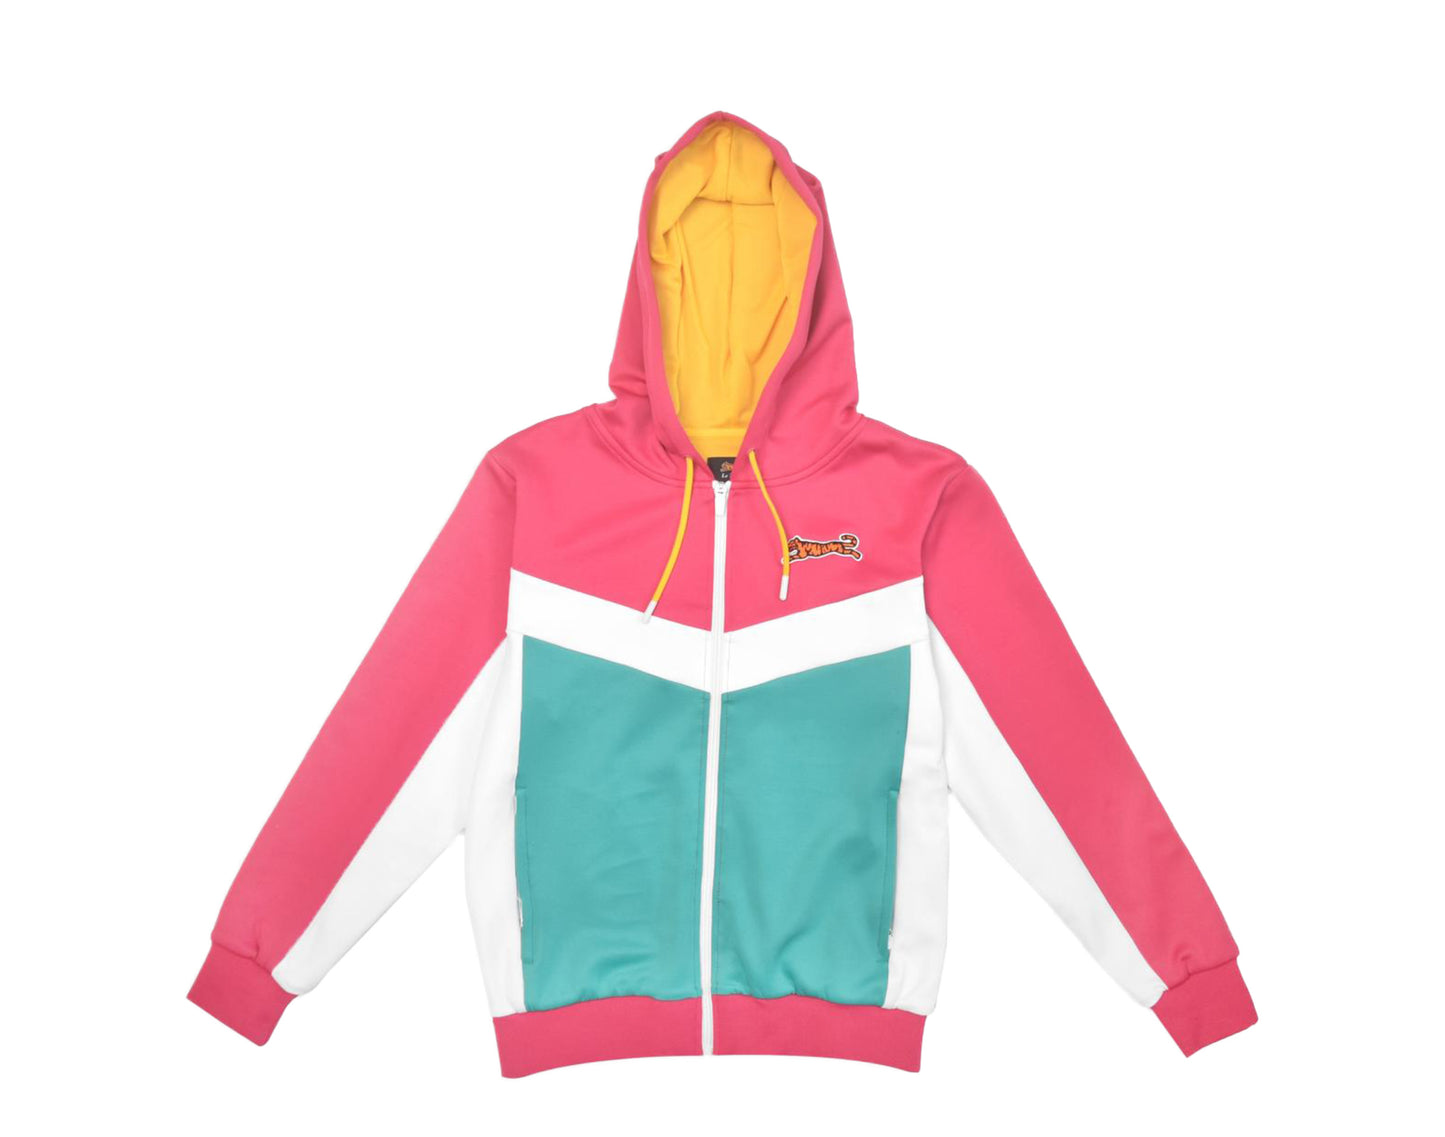 Le Tigre Sophia Hooded Track-Top Magenta Pink/Green Women's Jacket S20WT001-MAG